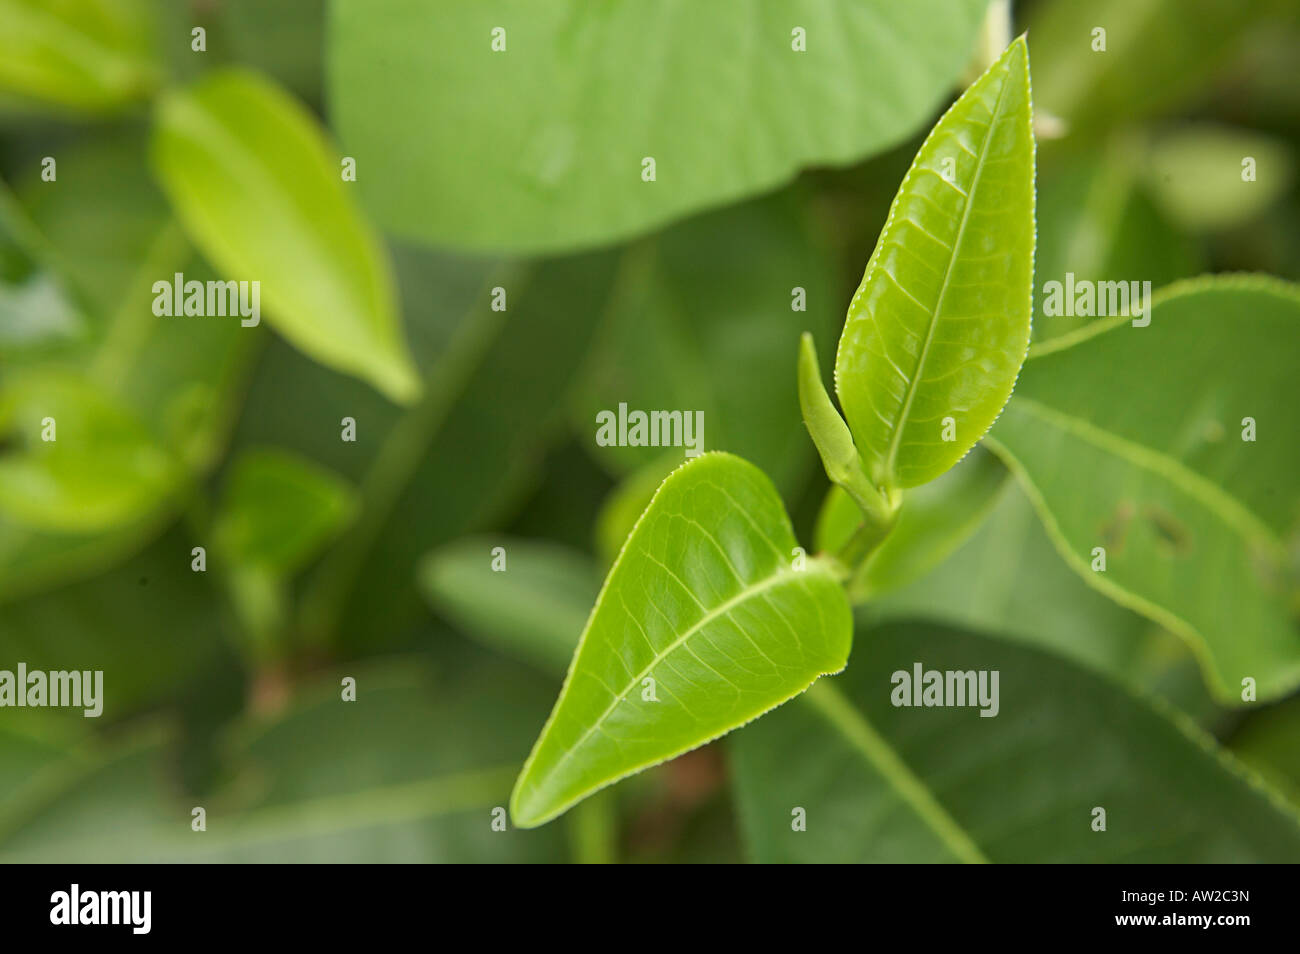 The top of a tea plant which is picked during harvesting Stock Photo